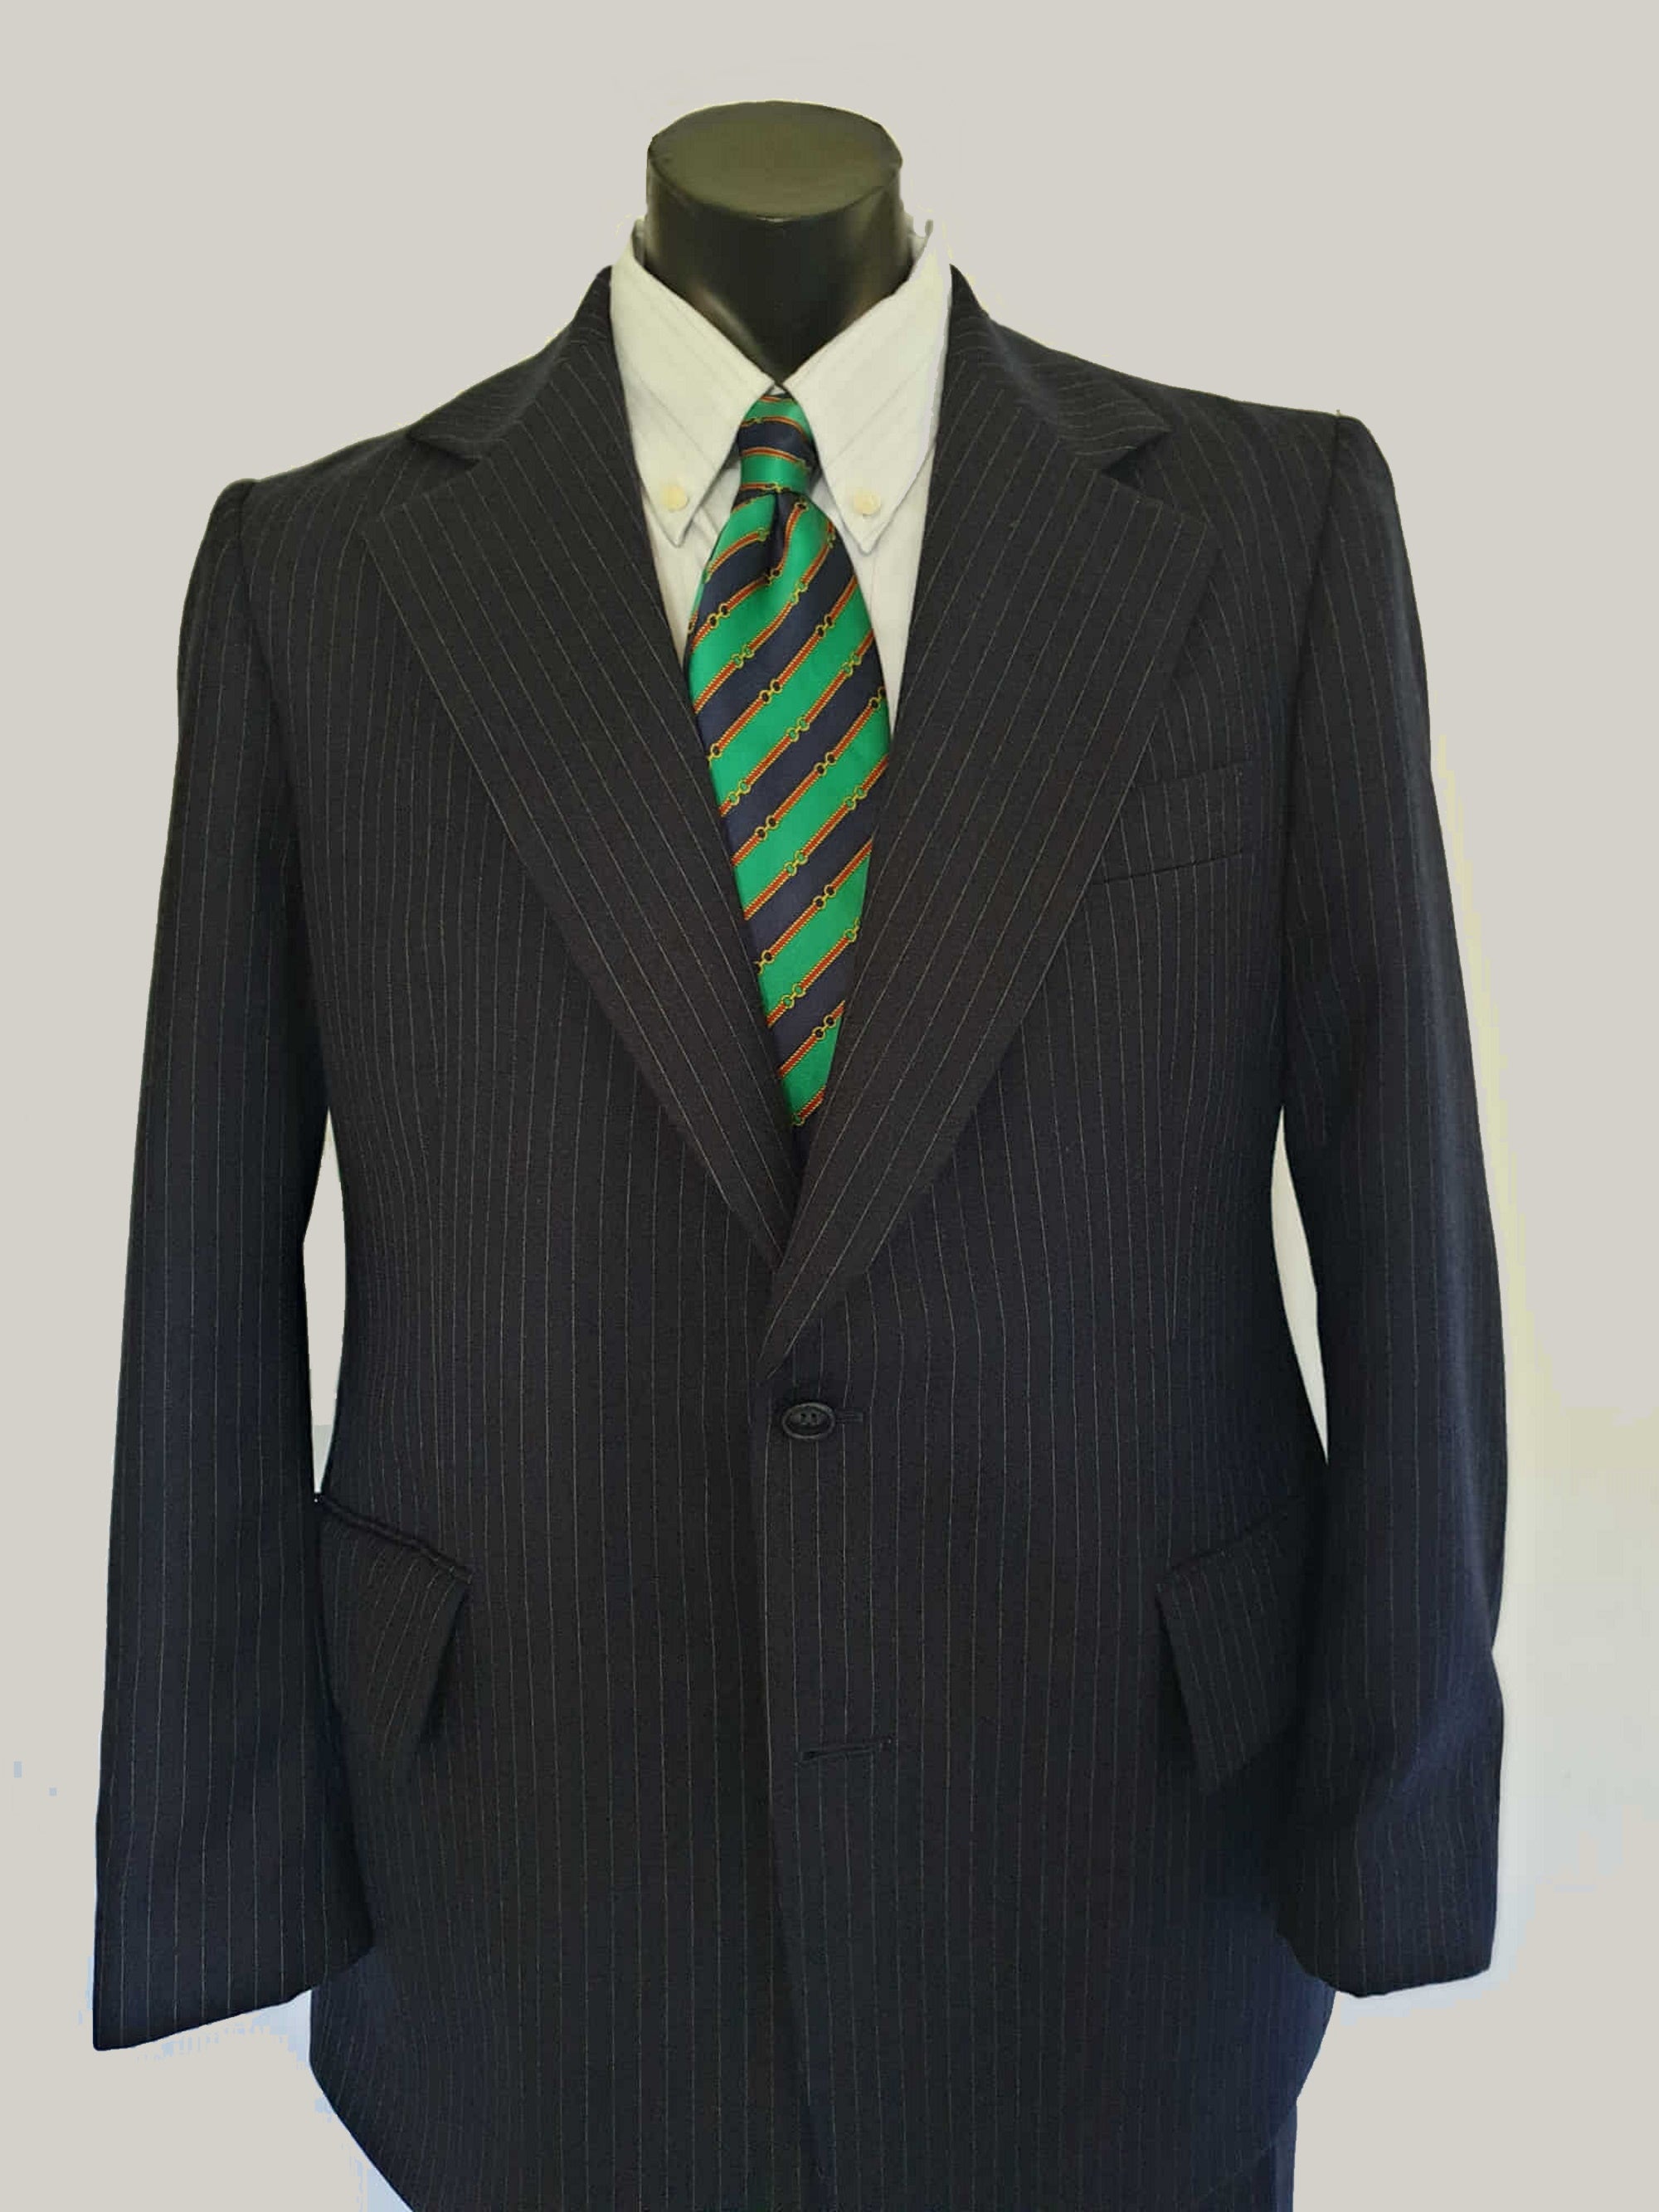 1970s vintage navy blue pin striped wool suit charles bud tingwell estate